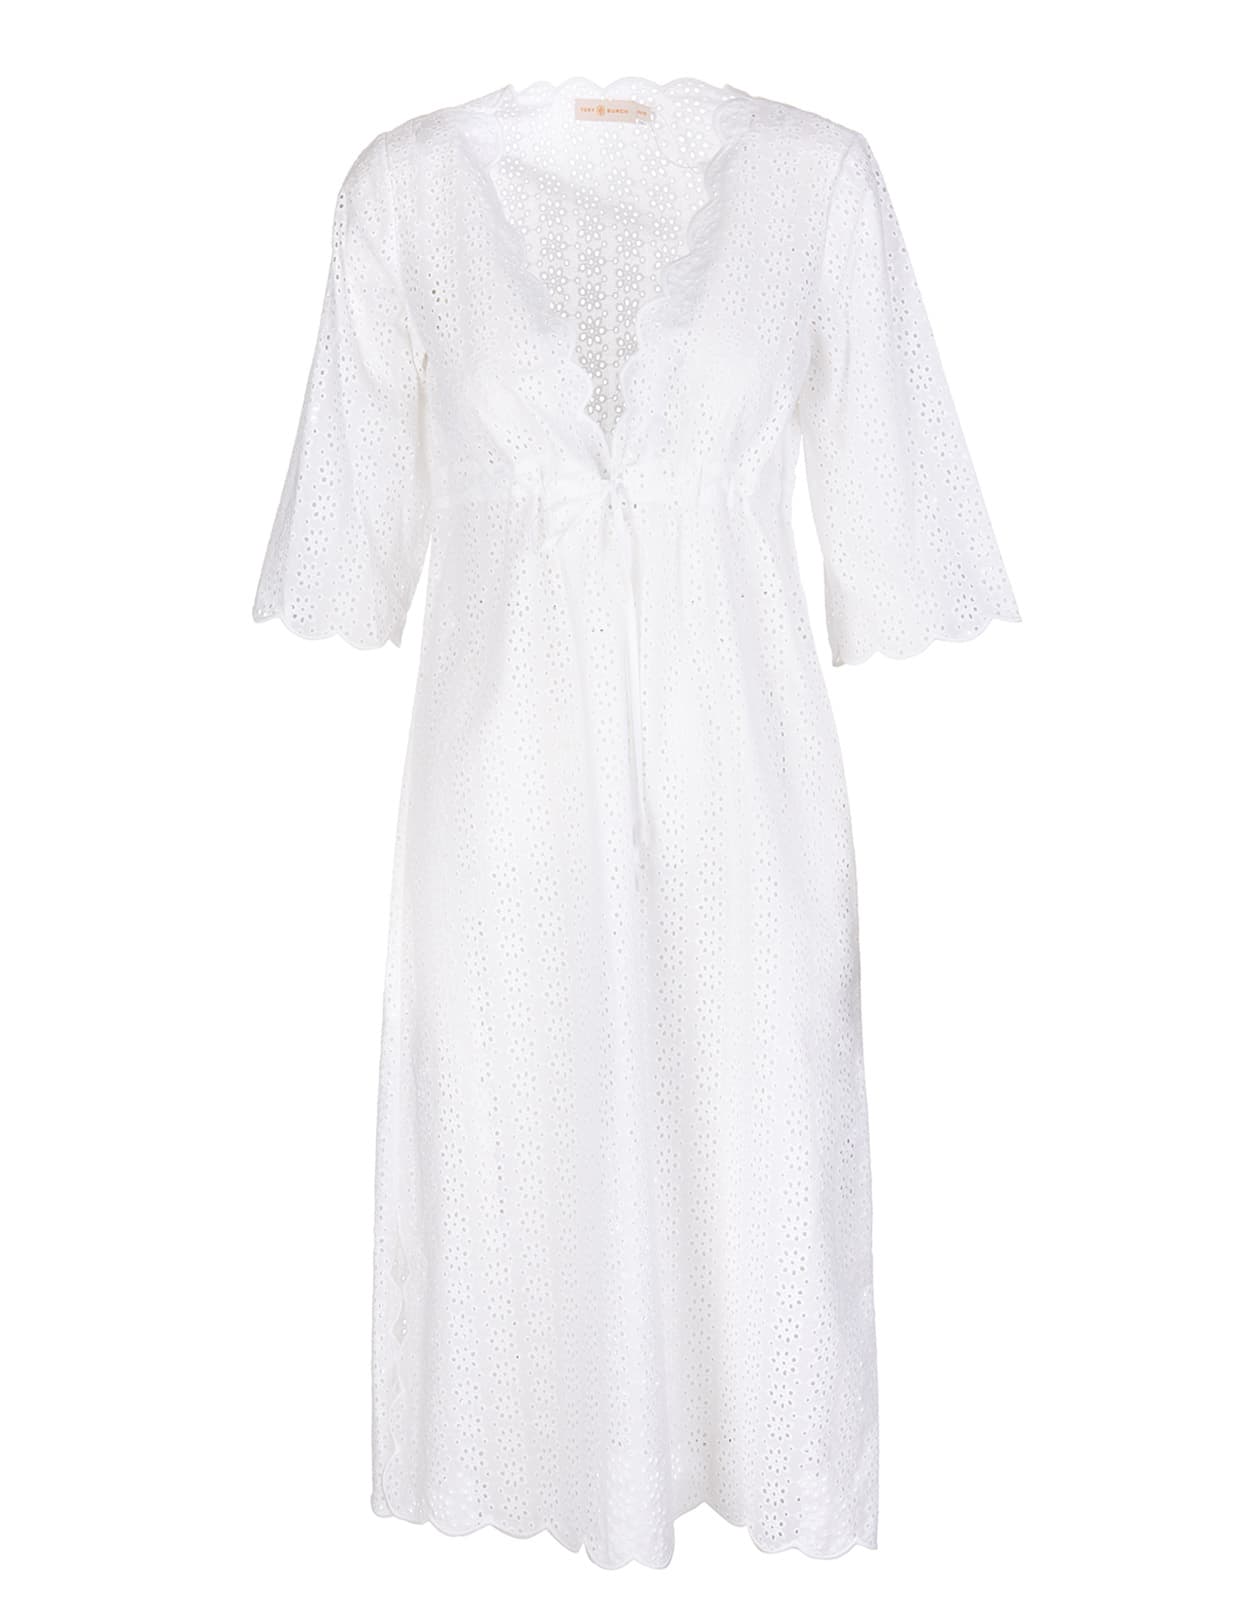 Tory Burch White Cotton Broderie Anglaise Dress Woman